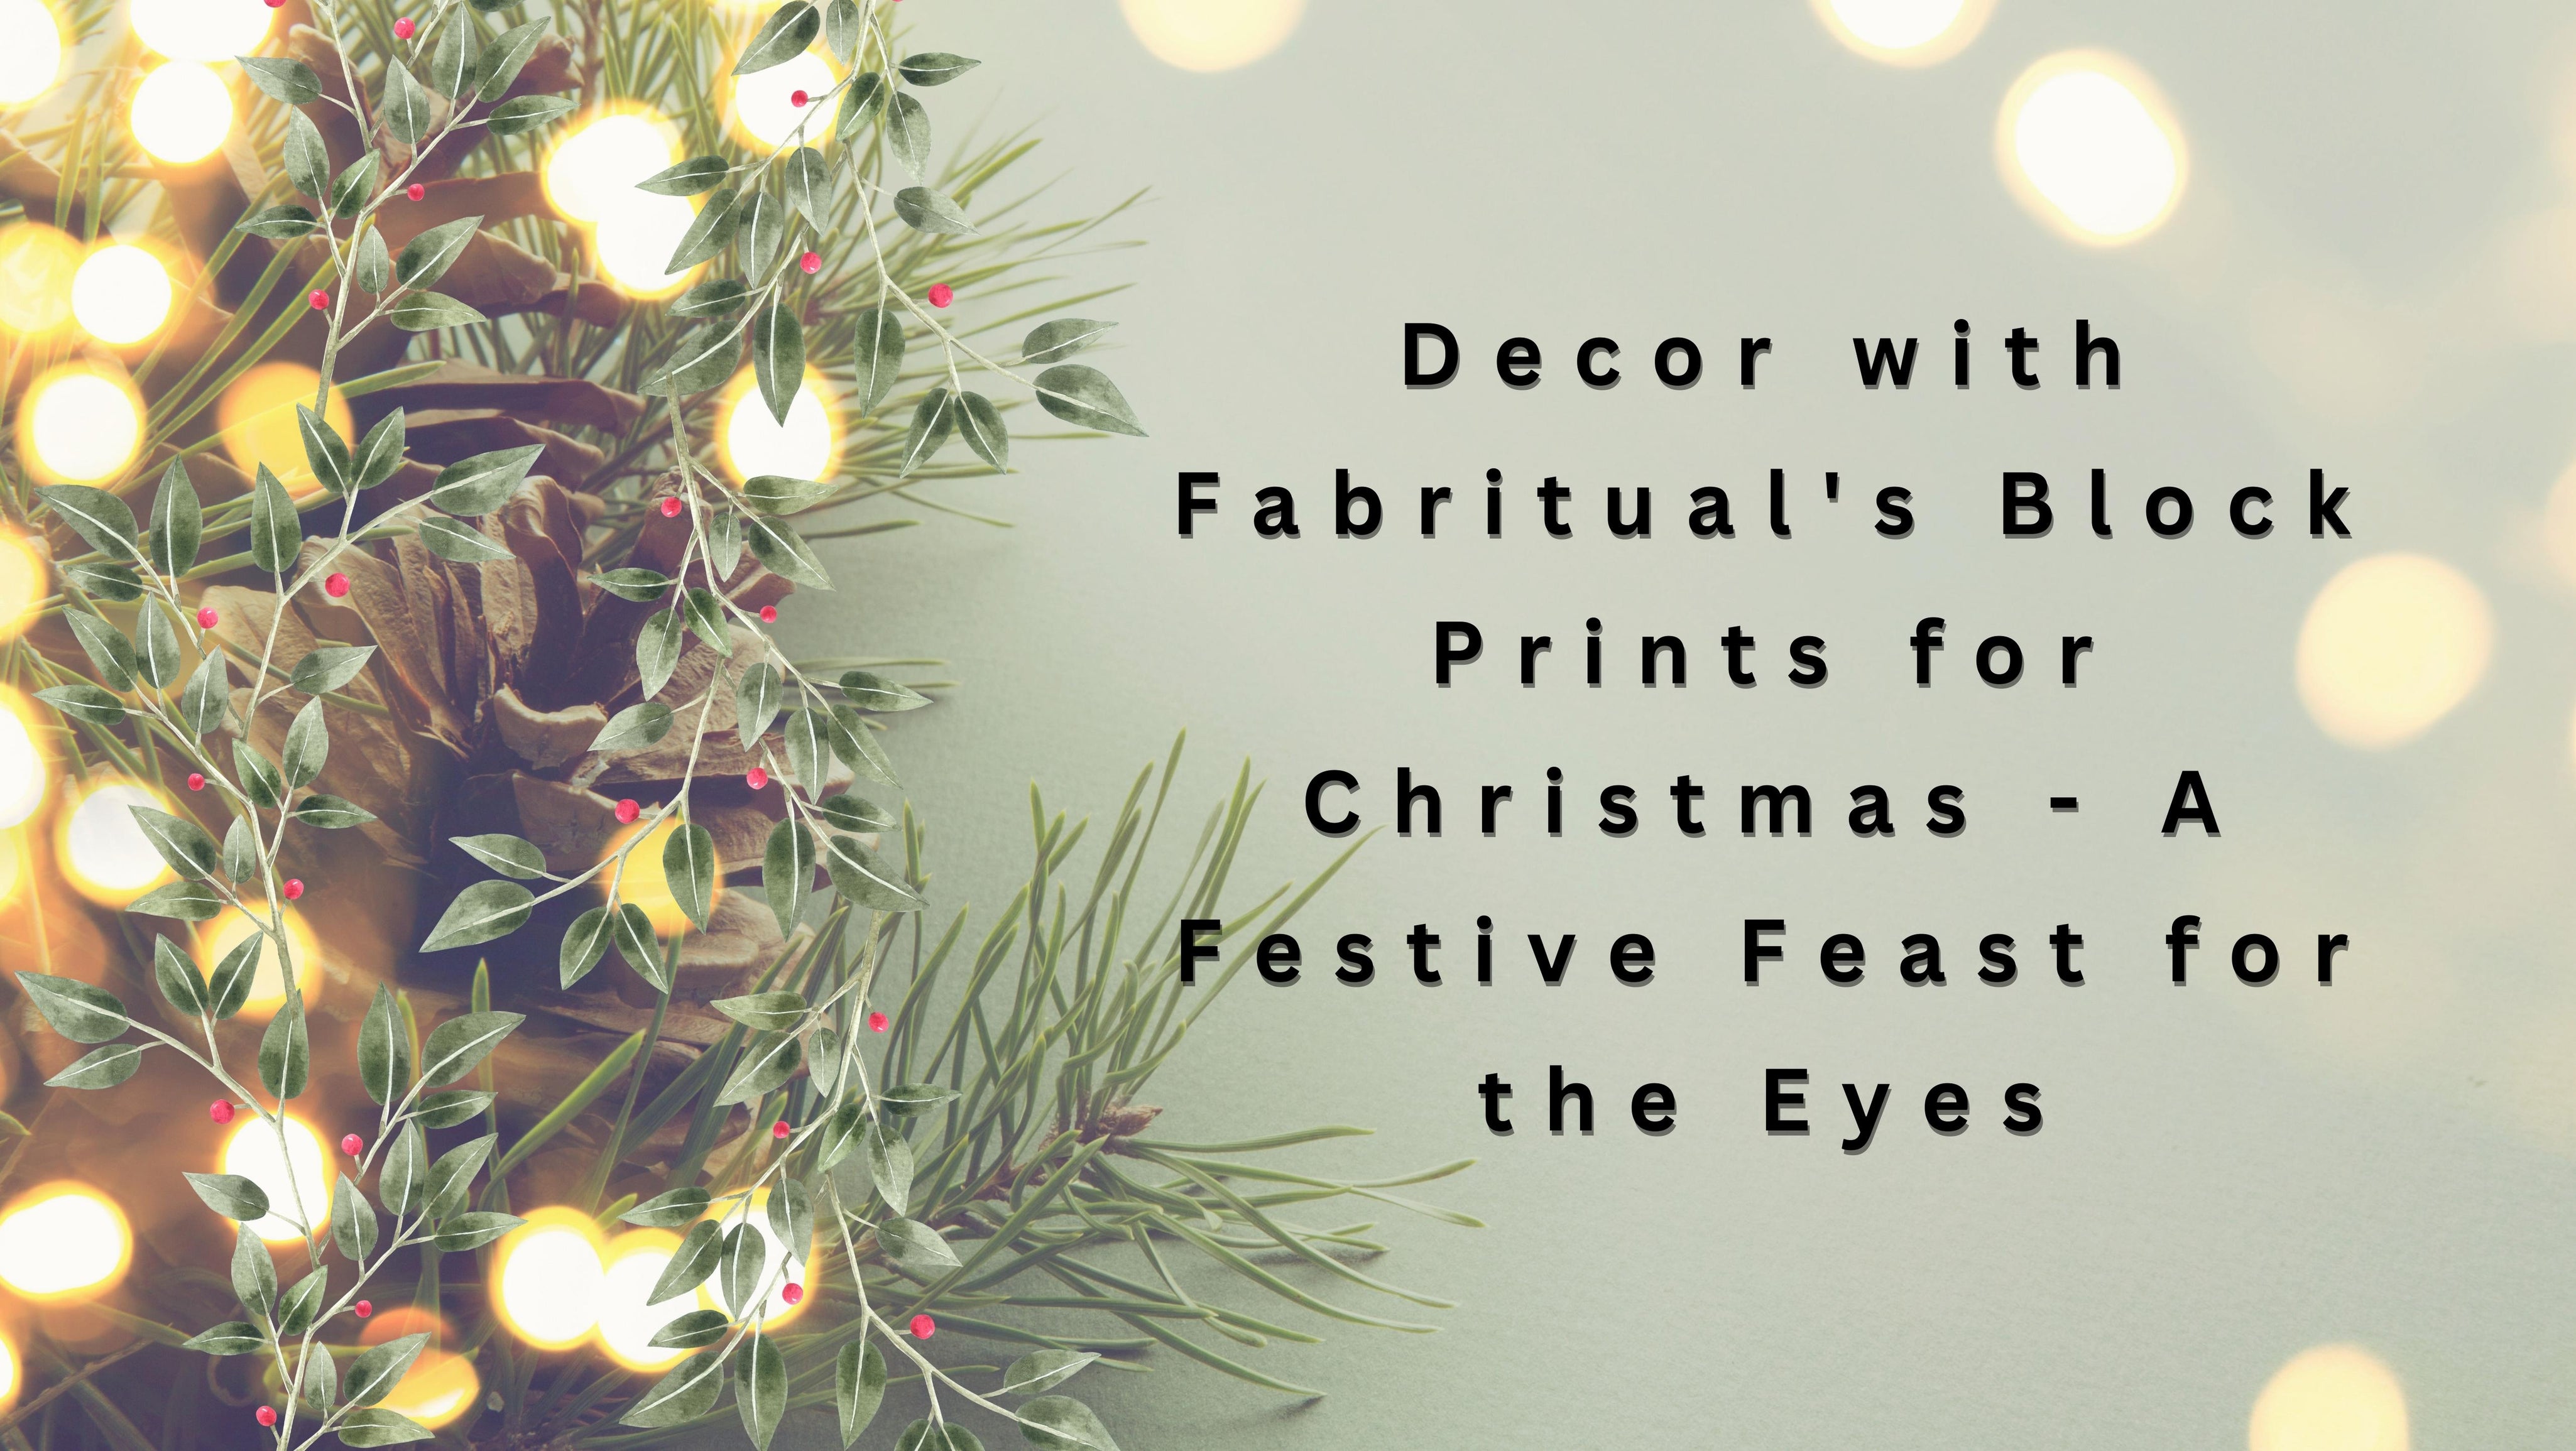 Decor with Fabritual's Block Prints for Christmas - A Festive Feast for the Eyes